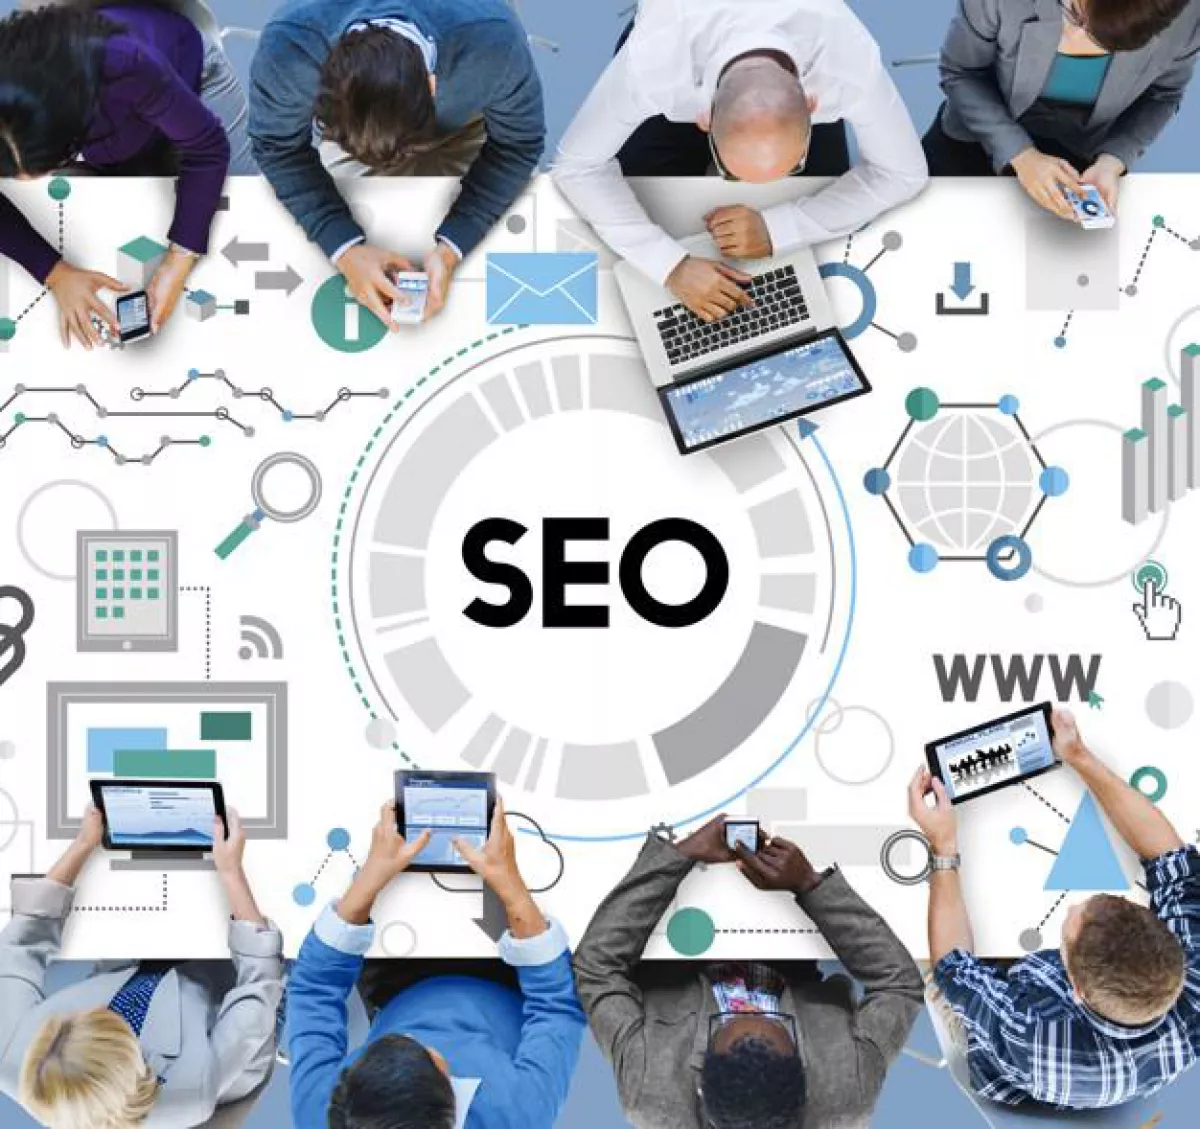 Hire SEO Experts - Google Certified Local SEO Experts for Hire